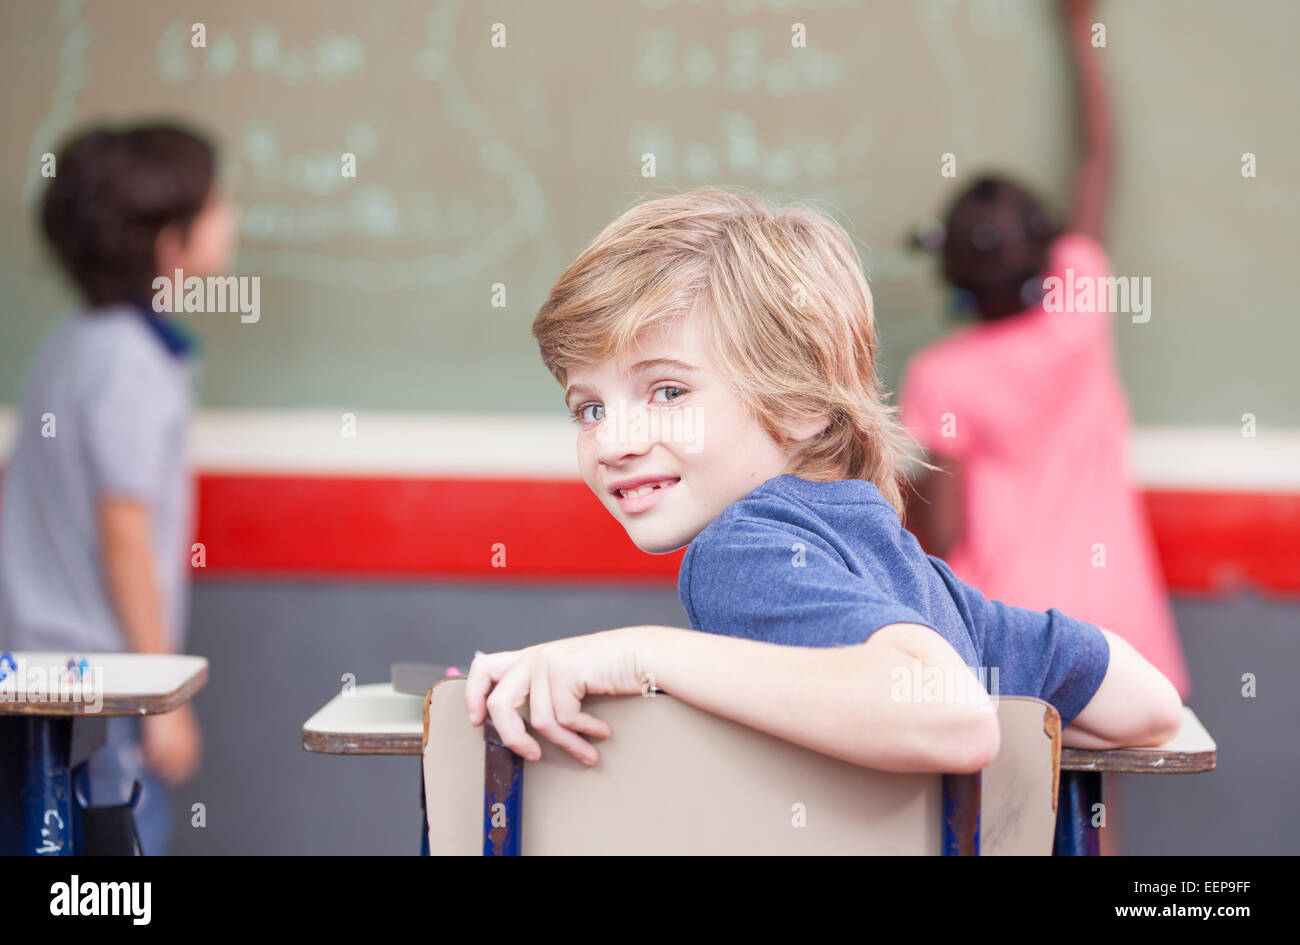 Multi ethnic elementary classroom. Kid looking at camera while classmates at chalkboard. Stock Photo